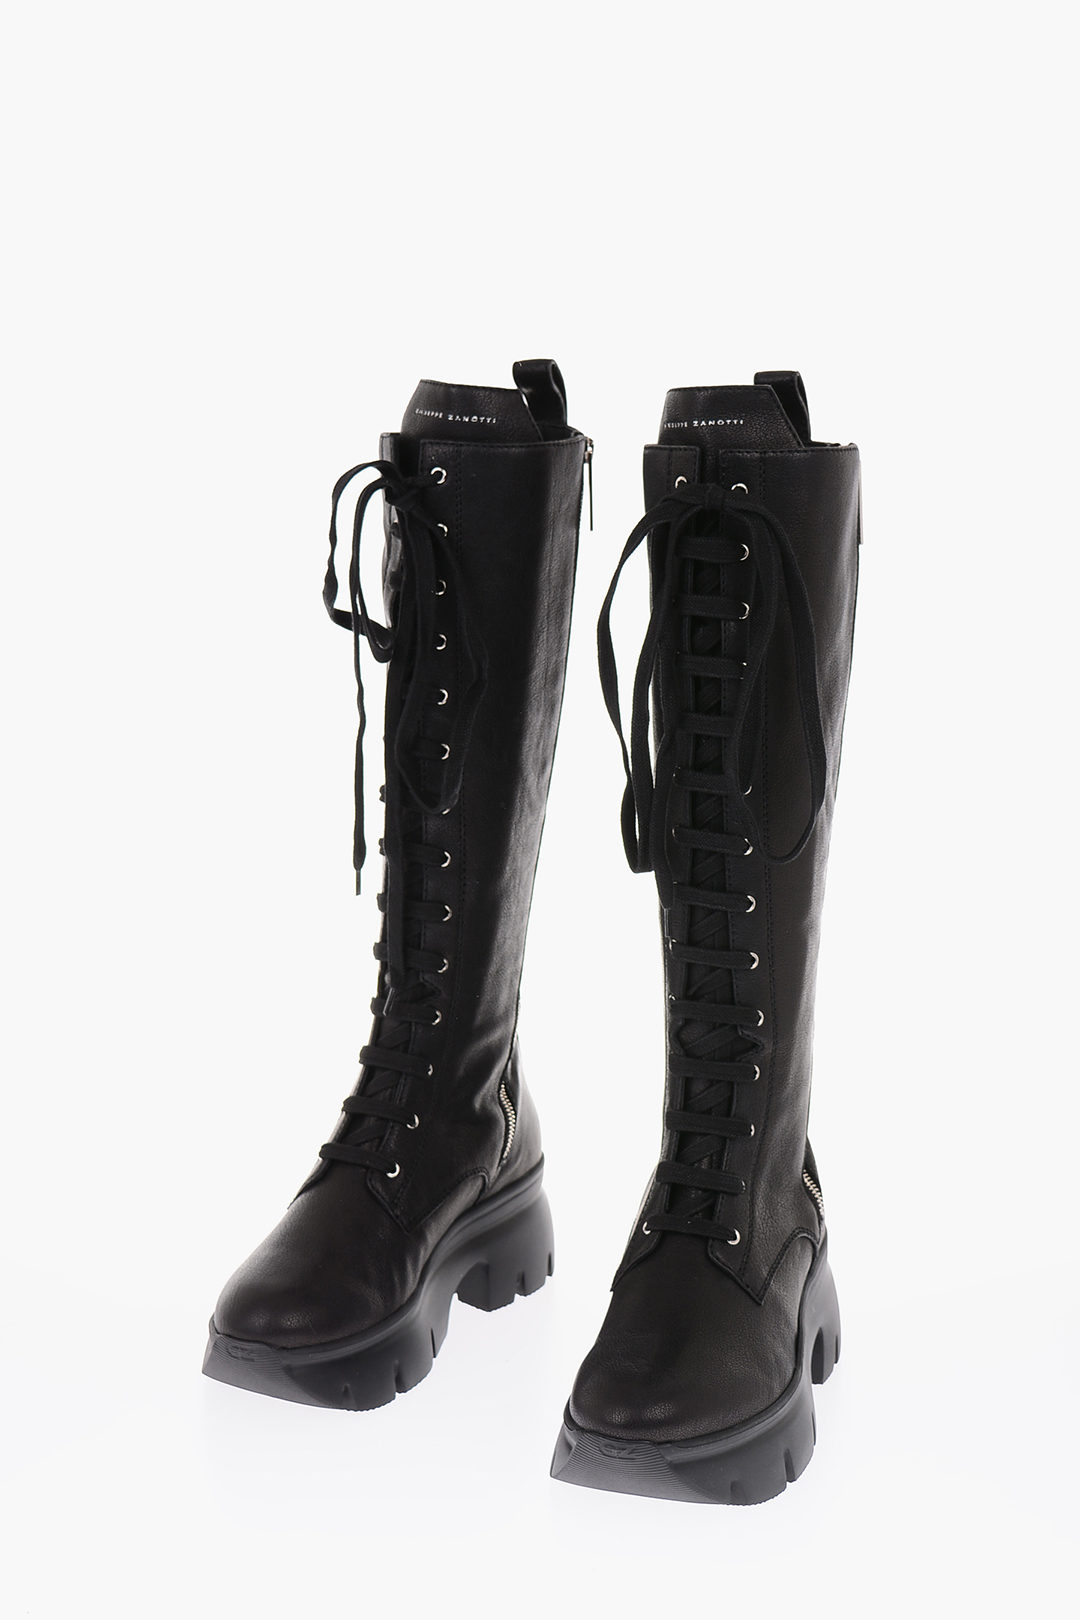 leather APOCALYPSE combat Boots with side zip